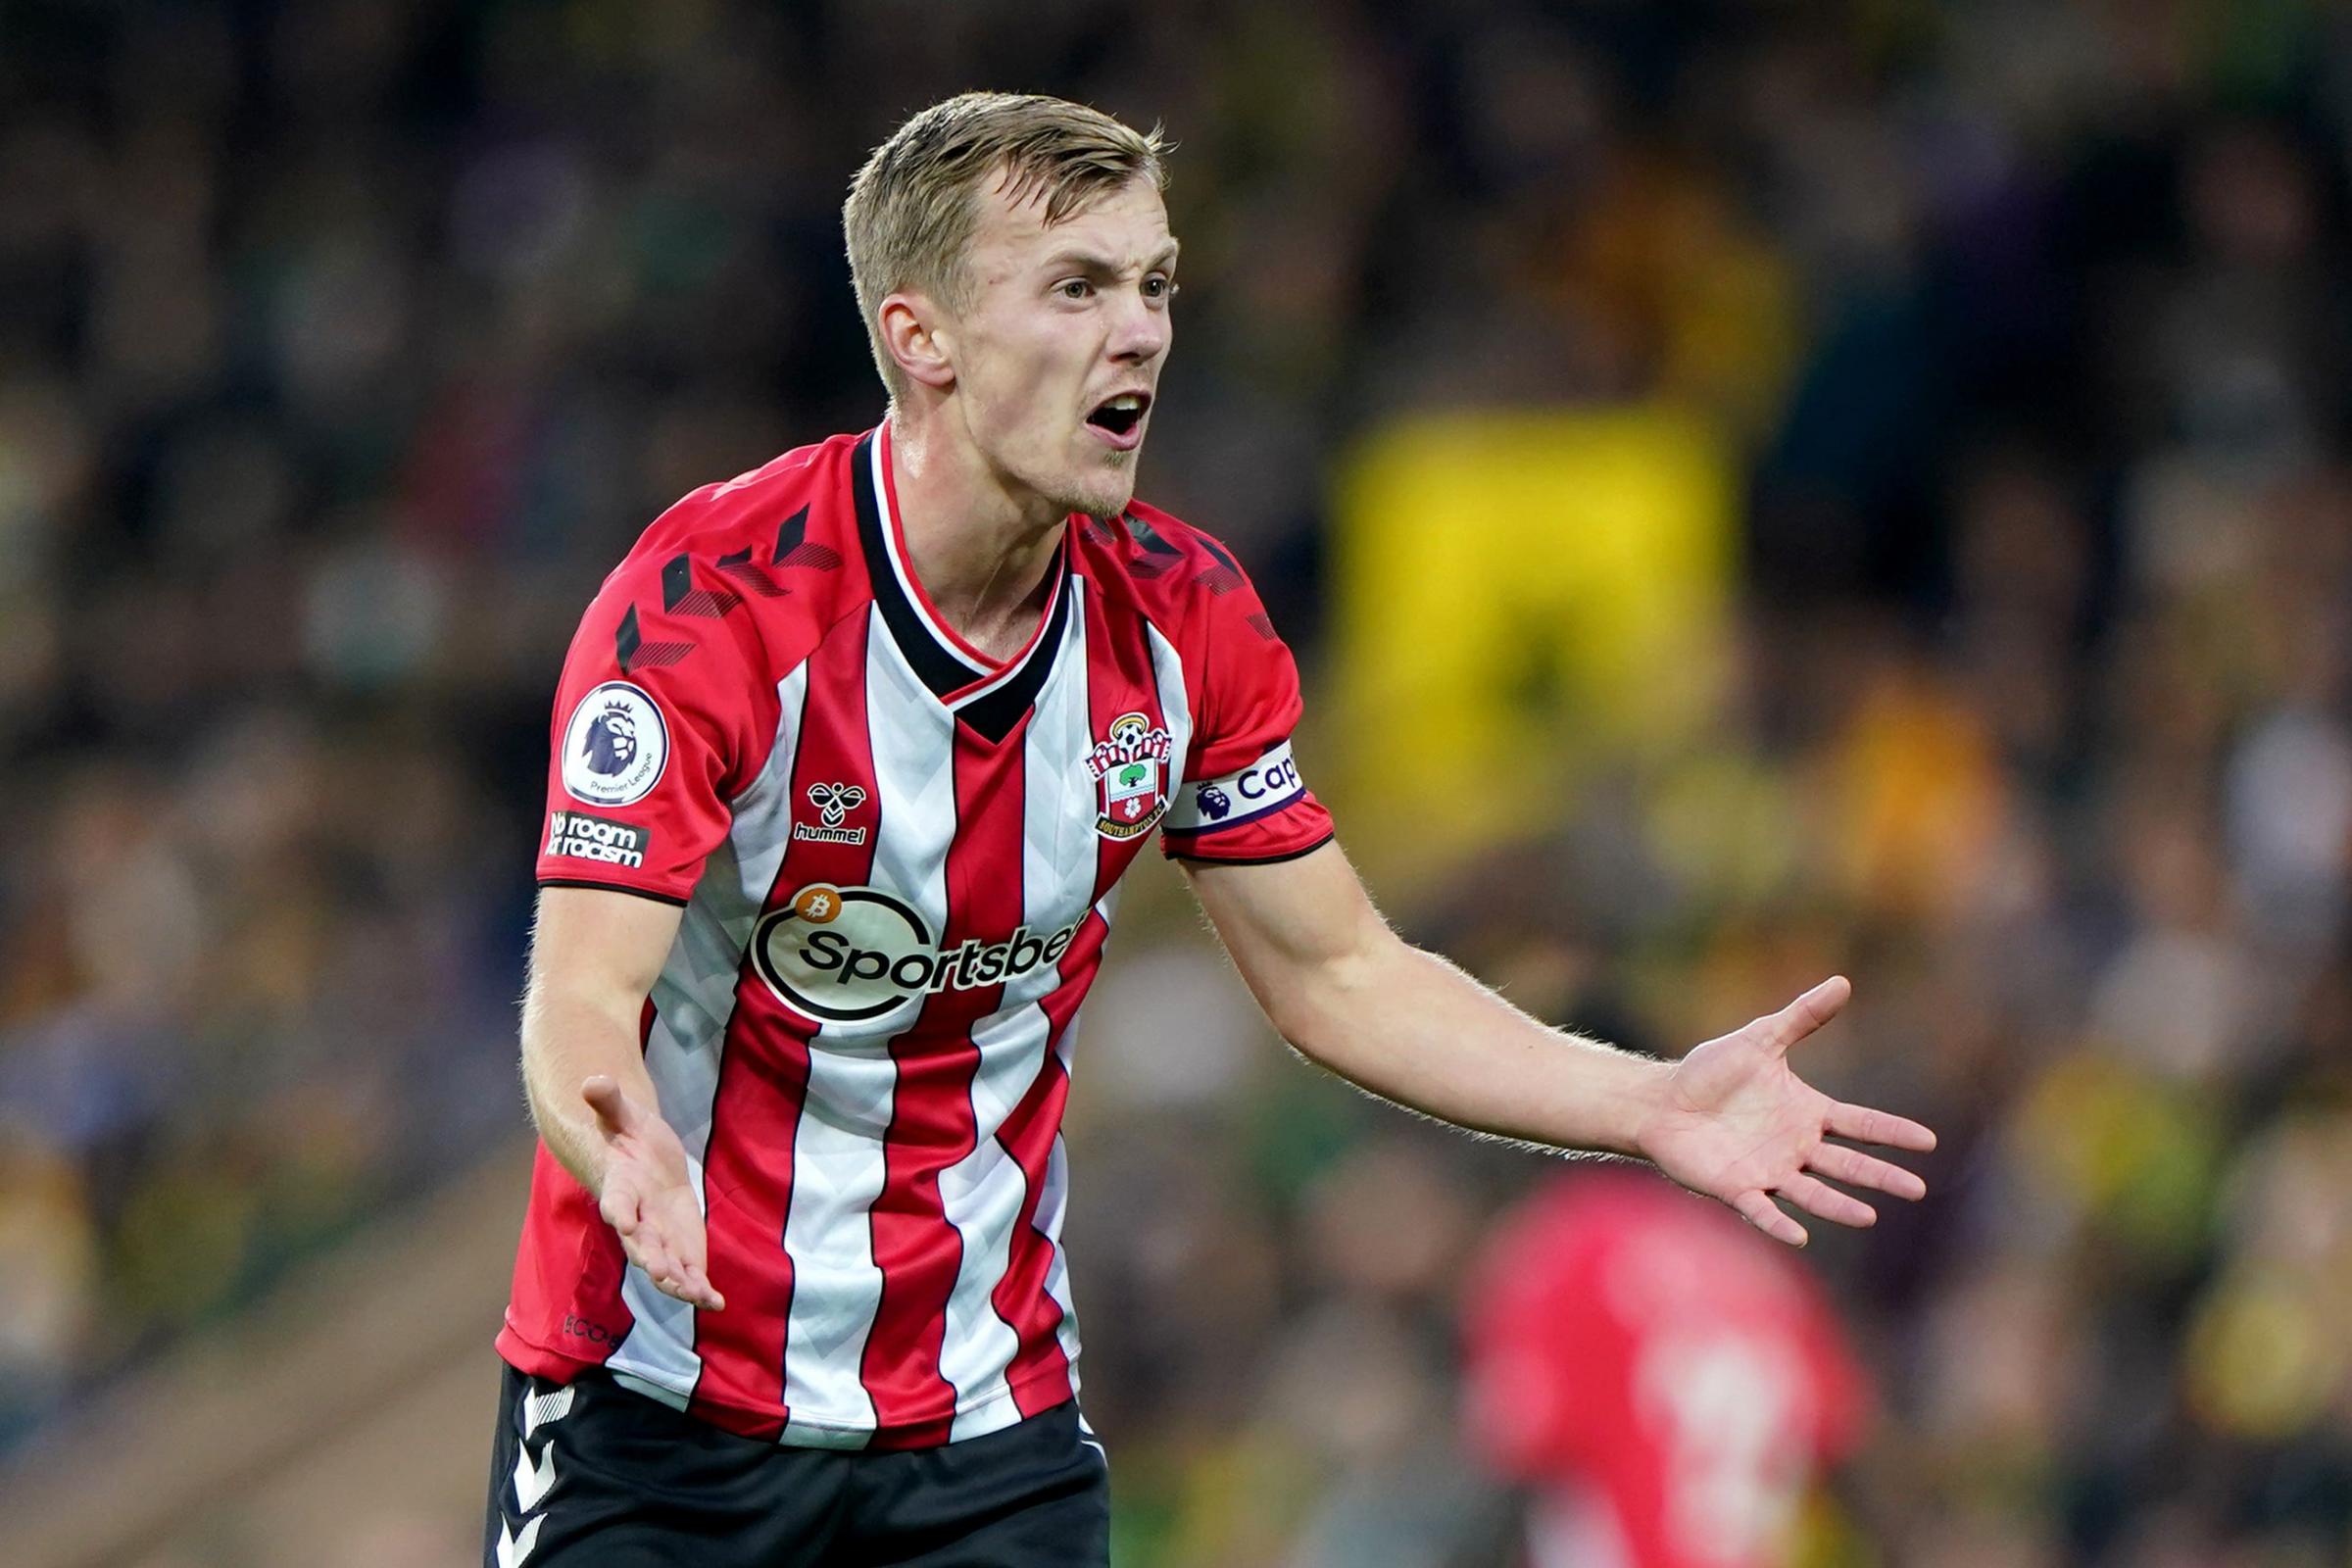 James ward-prowse